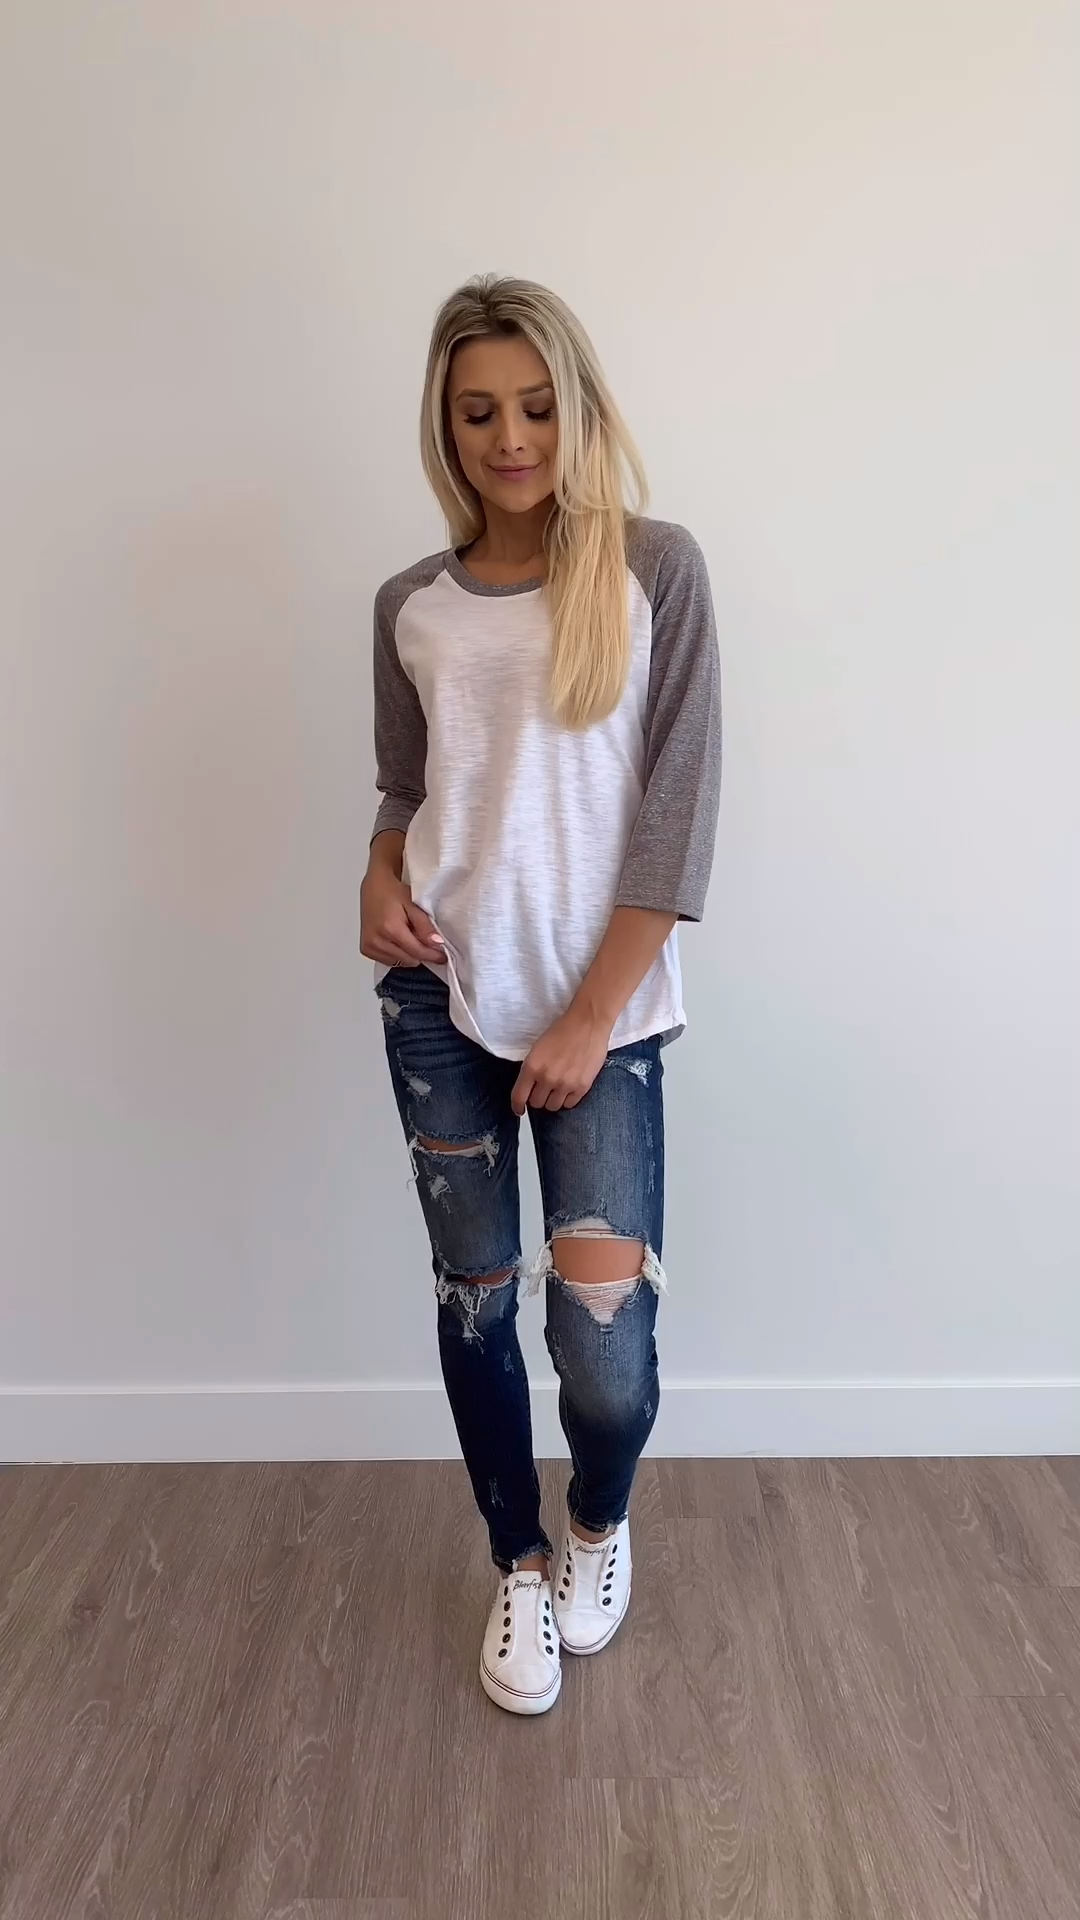 10 style Casual teenager ideas